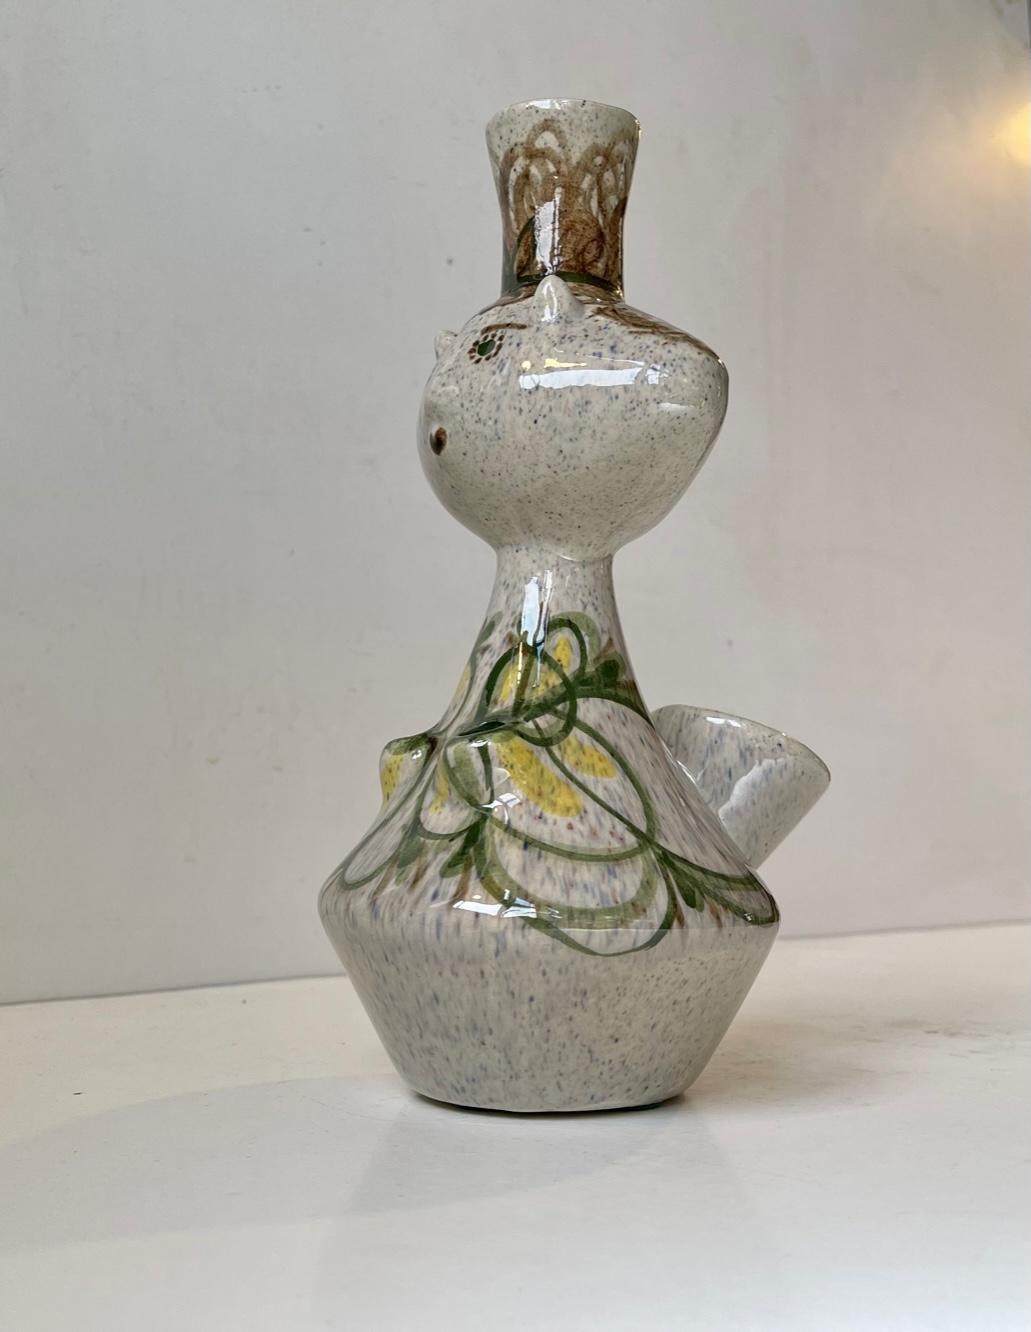 Glazed Sculptural Stoneware in the Style of Pablo Picasso, 1960s For Sale 3